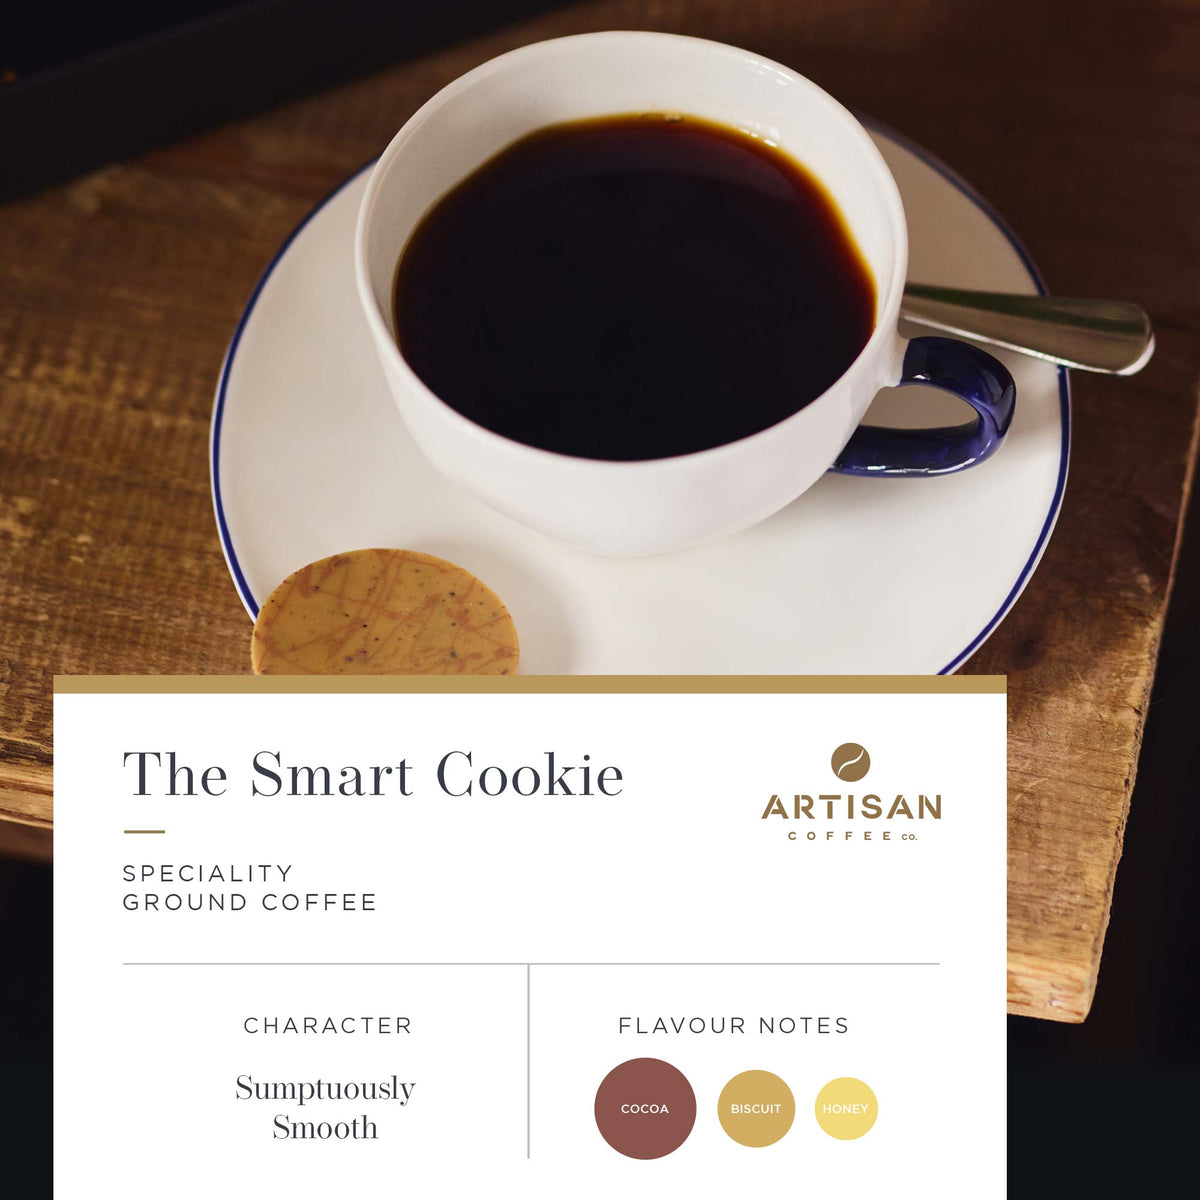 Artisan Coffee Co The Smart Cookie ground coffee Infographic flavour notes